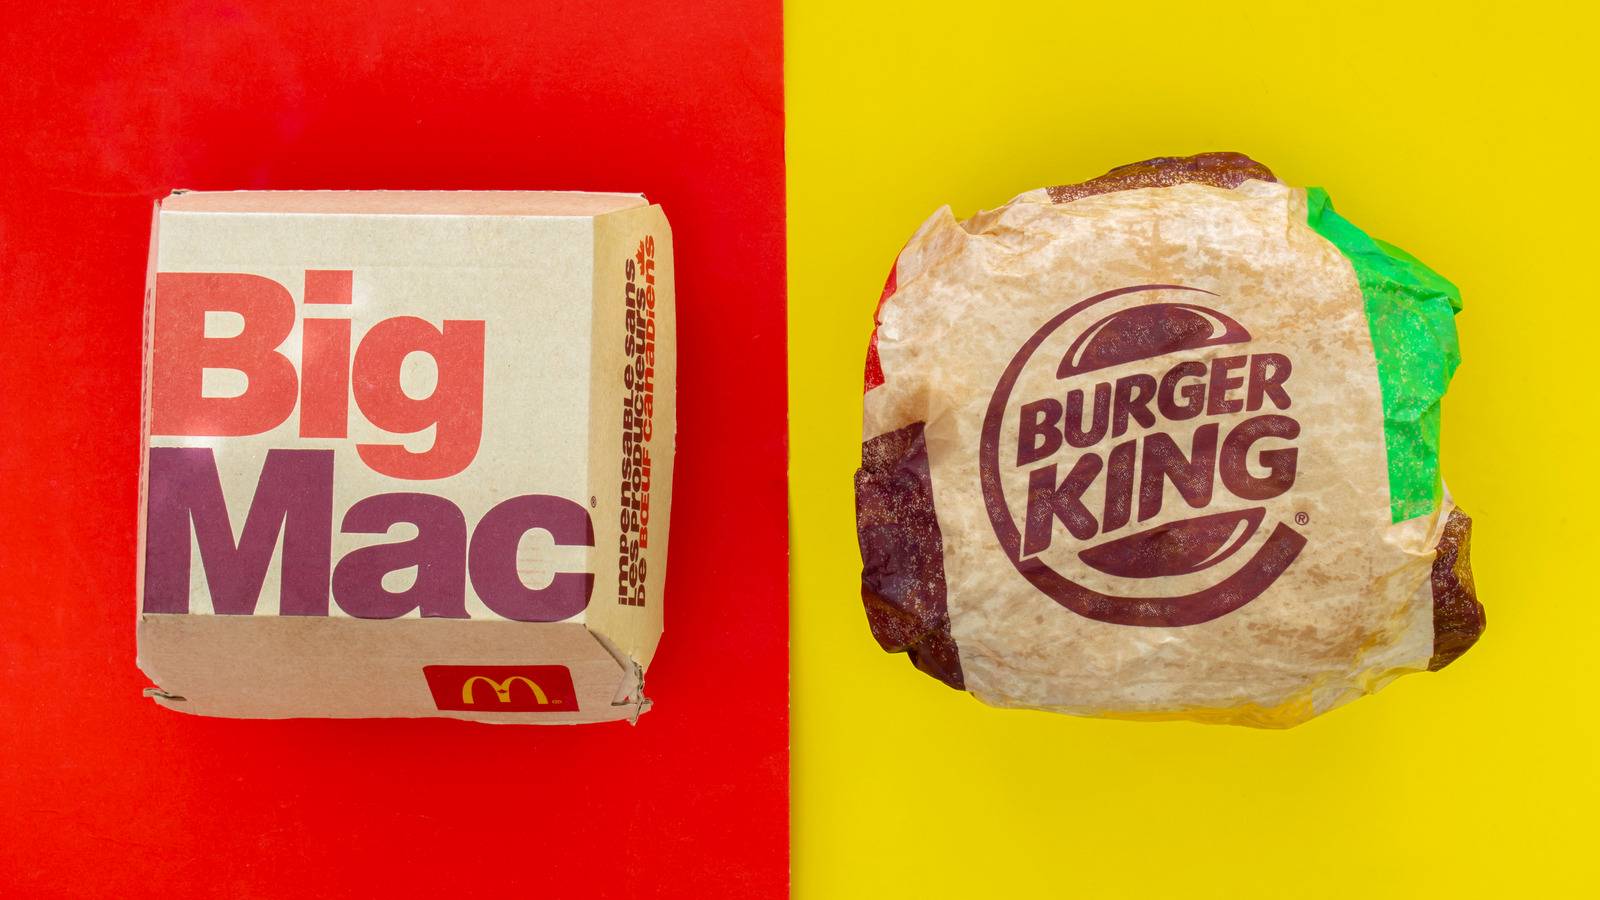 Food packaging at Burger King, McDonald's, and Wendy's found to contain  forever chemicals